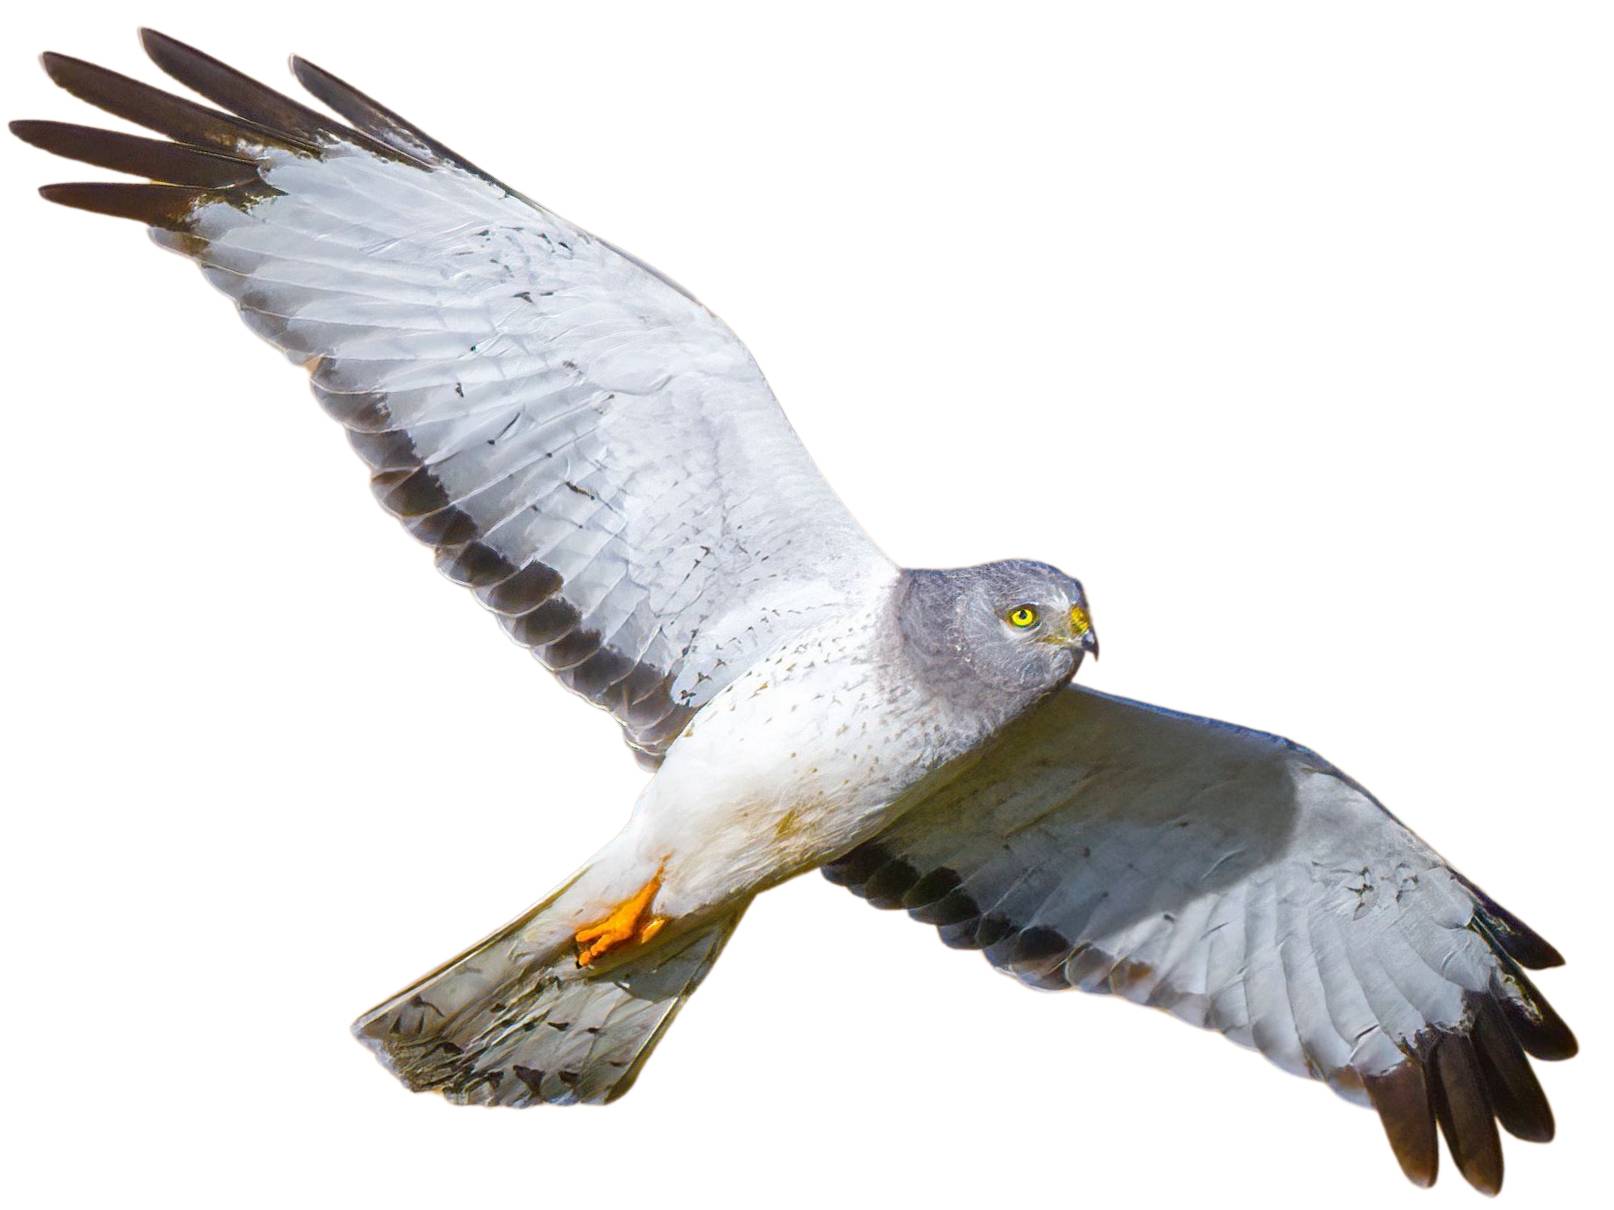 A photo of a Northern Harrier (Circus hudsonius), male